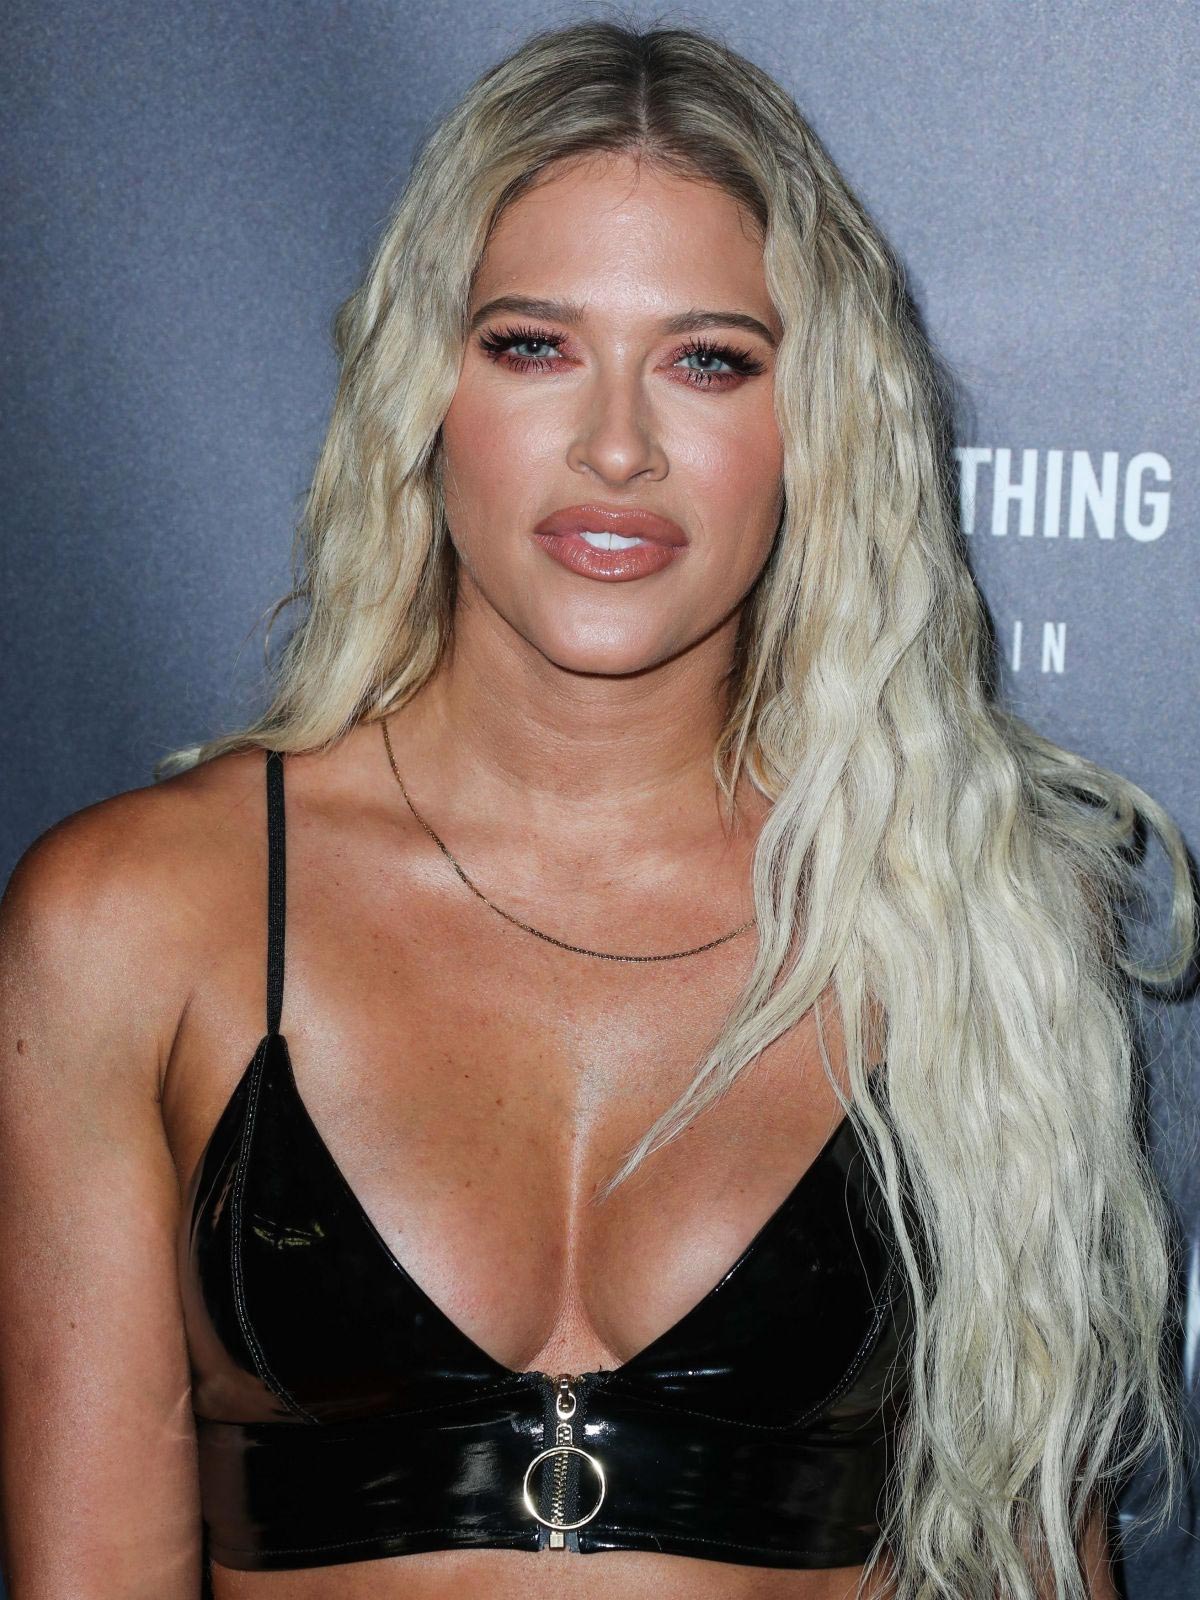 Barbie Blank at PrettyLittleThing Starring Hailey Baldwin Event in Los Angeles 2018/11/05